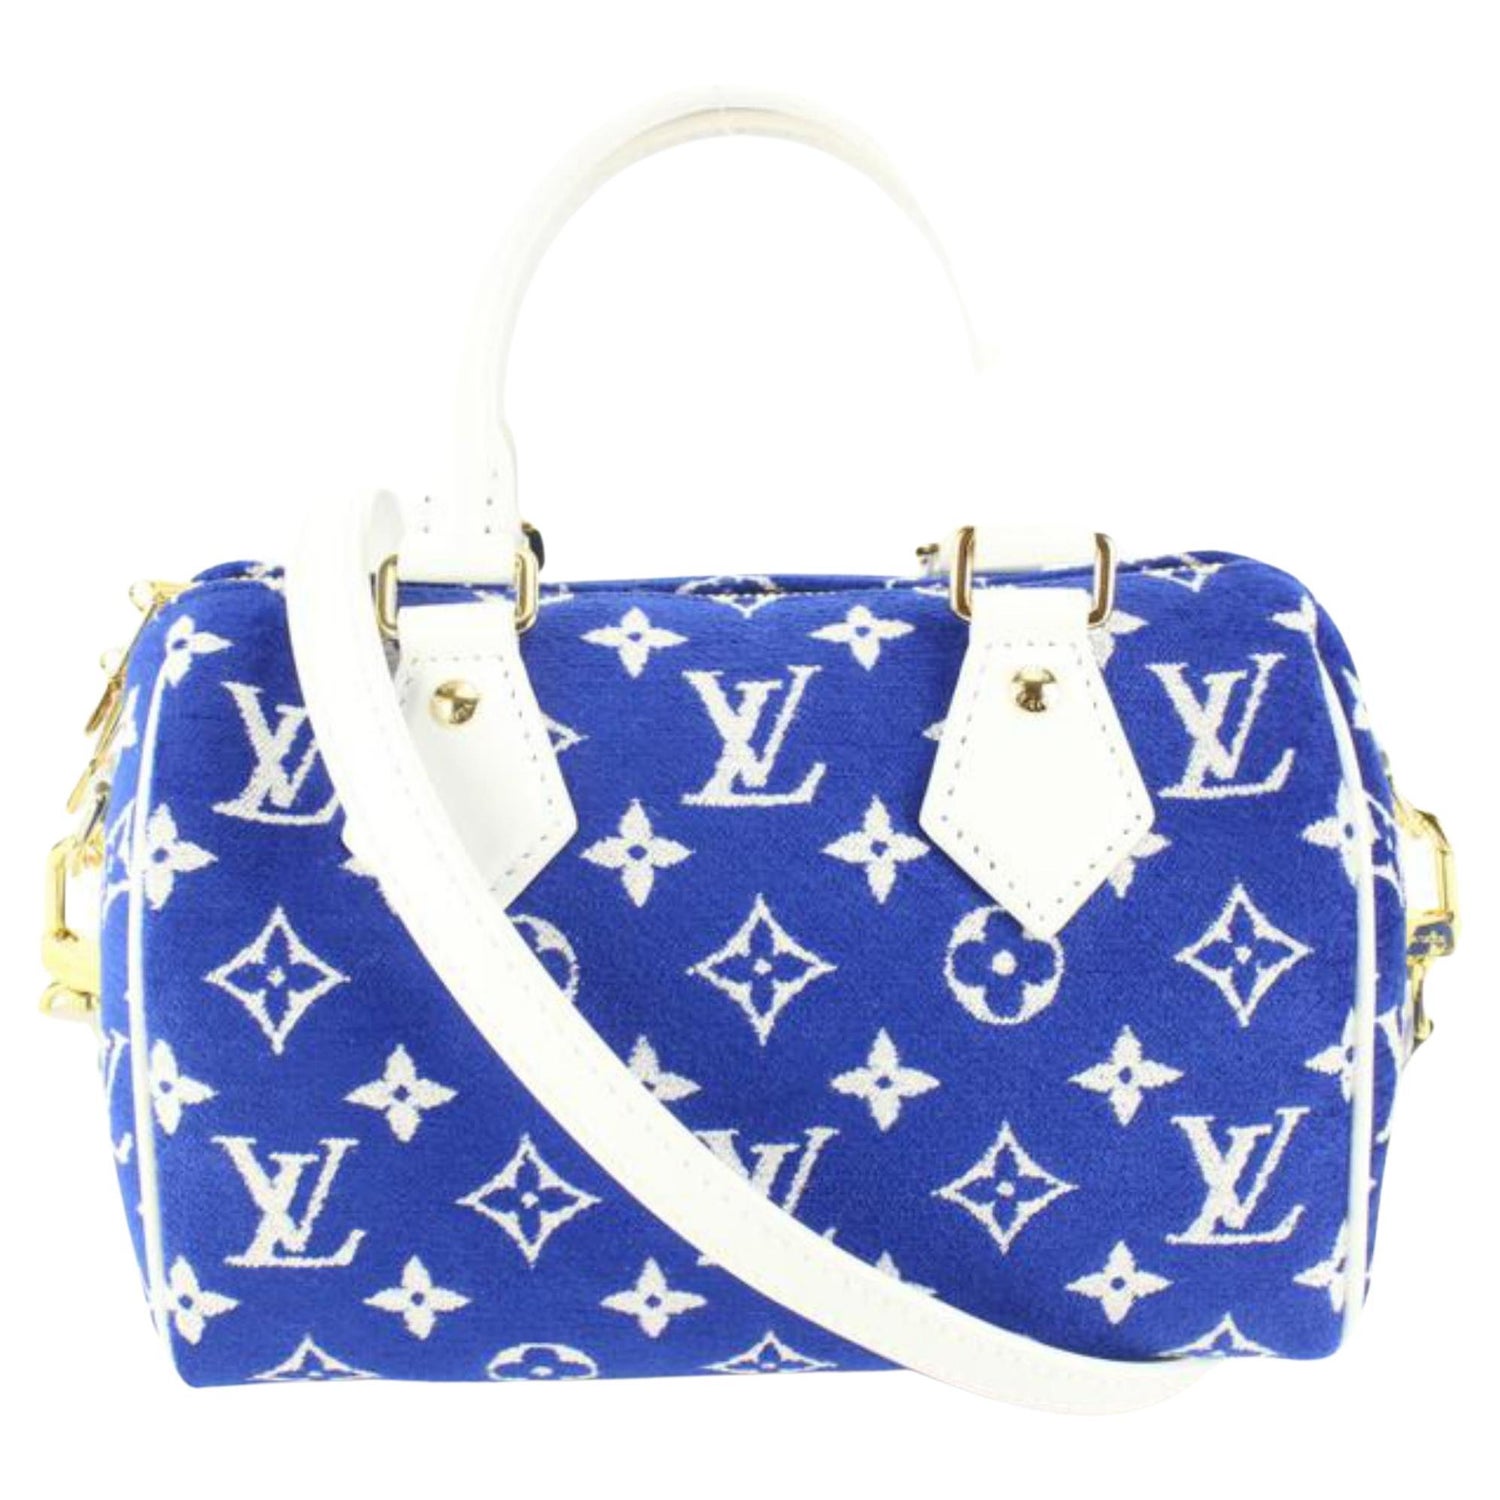 This Week, Louis Vuitton and Céline Bags Were the Undisputed